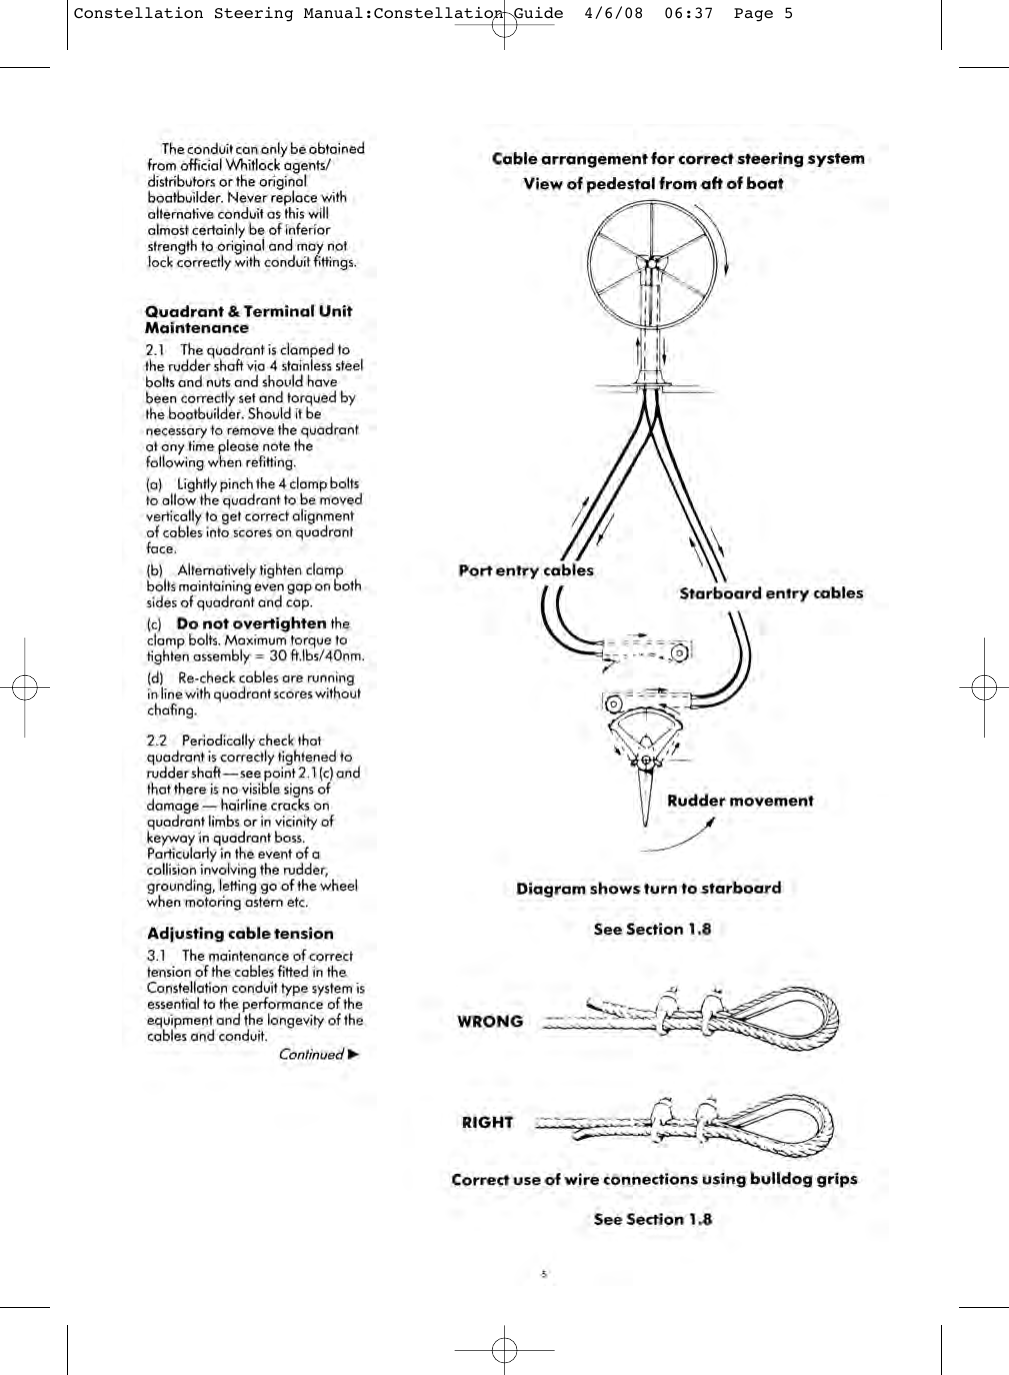 Page 5 of 8 - Constellation Steering Manual:Constellation Guide Constellation-Steering-Manual